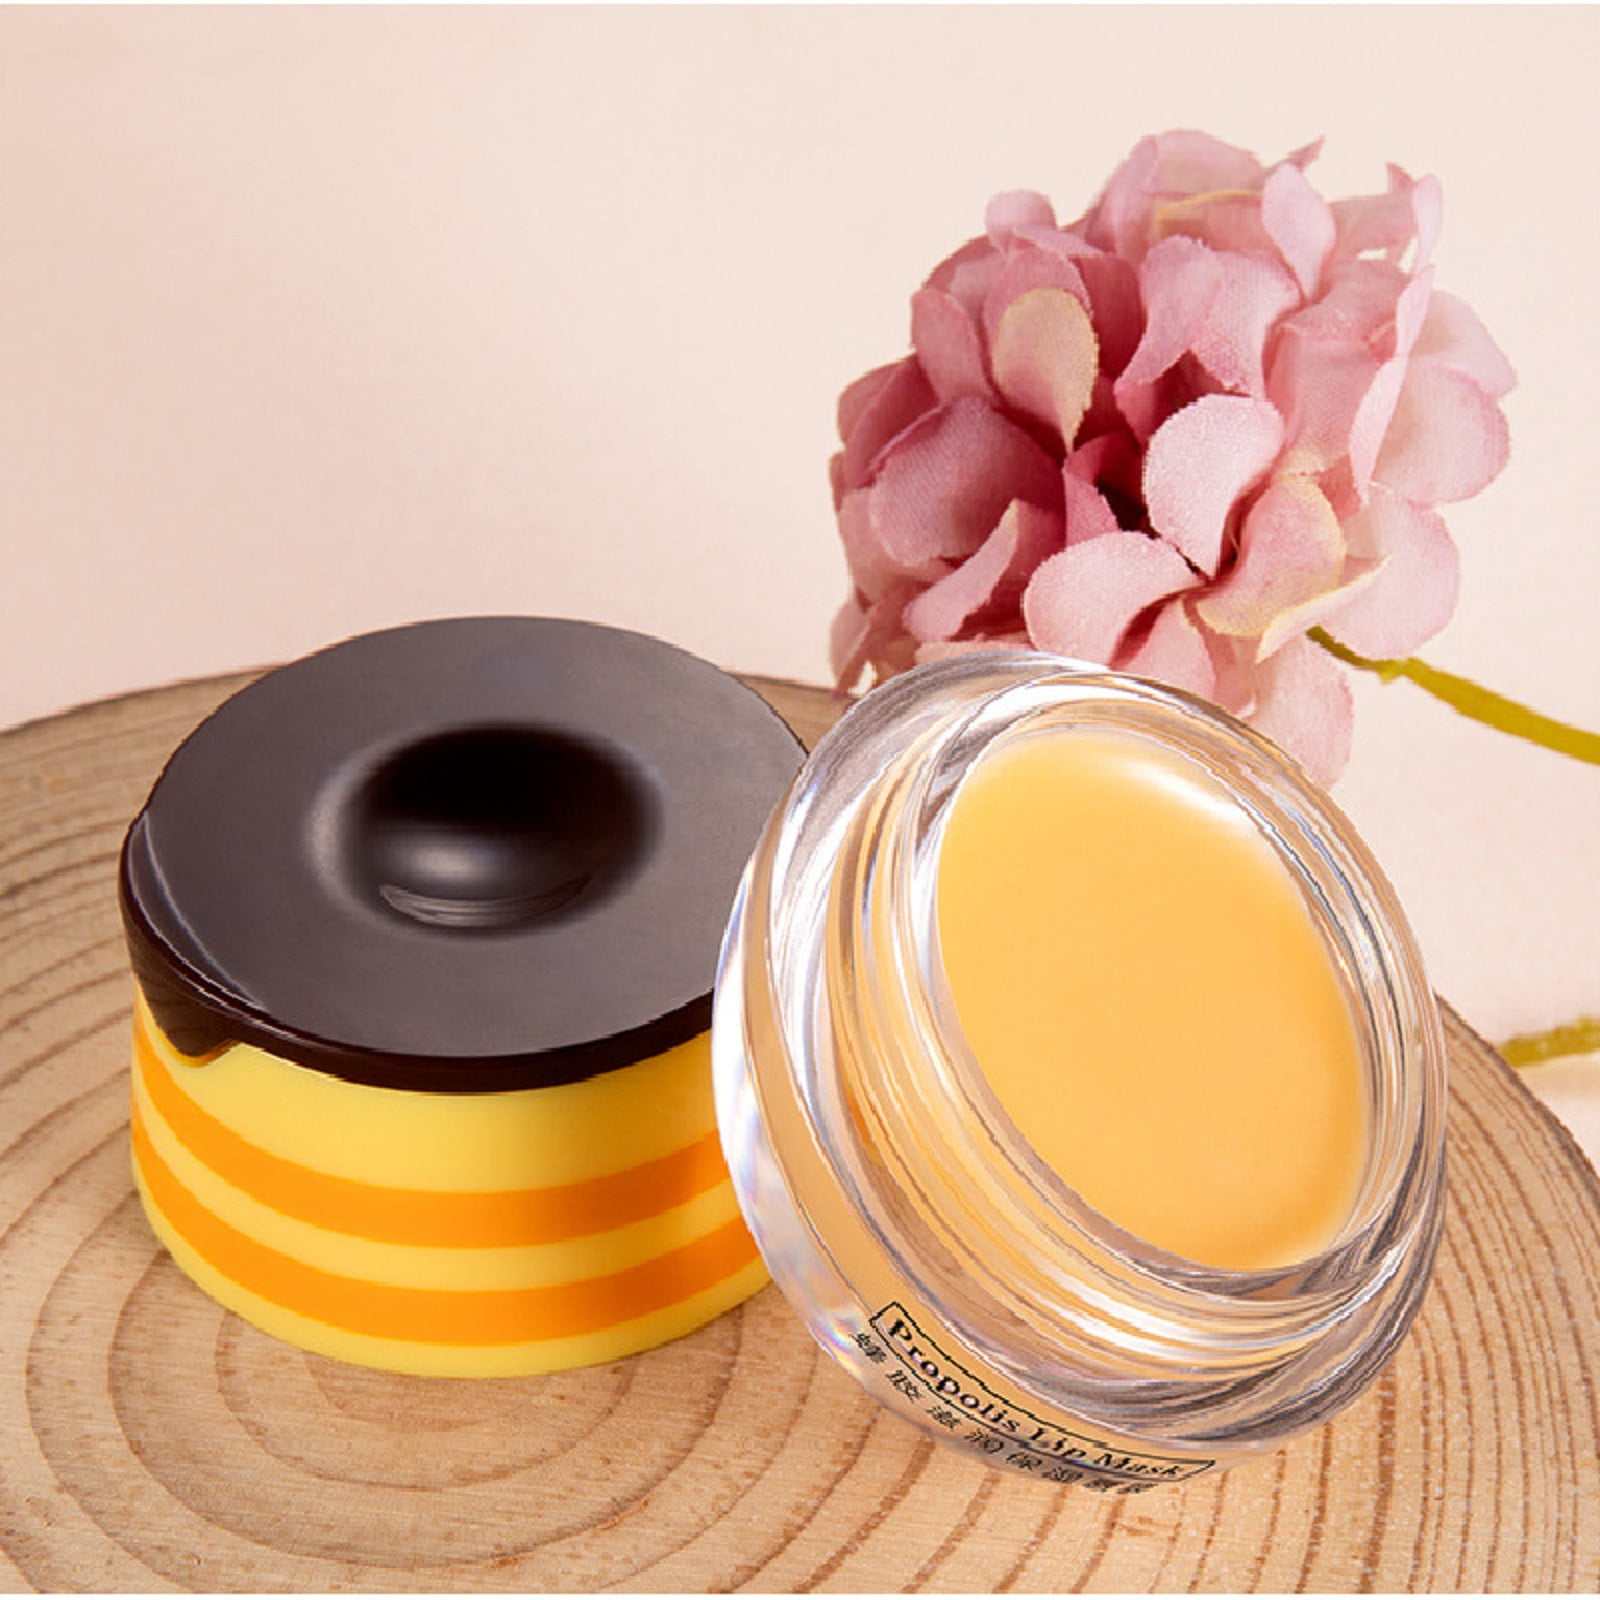 All Natural Beeswax and Propolis Skin Balm Small Size – Flying